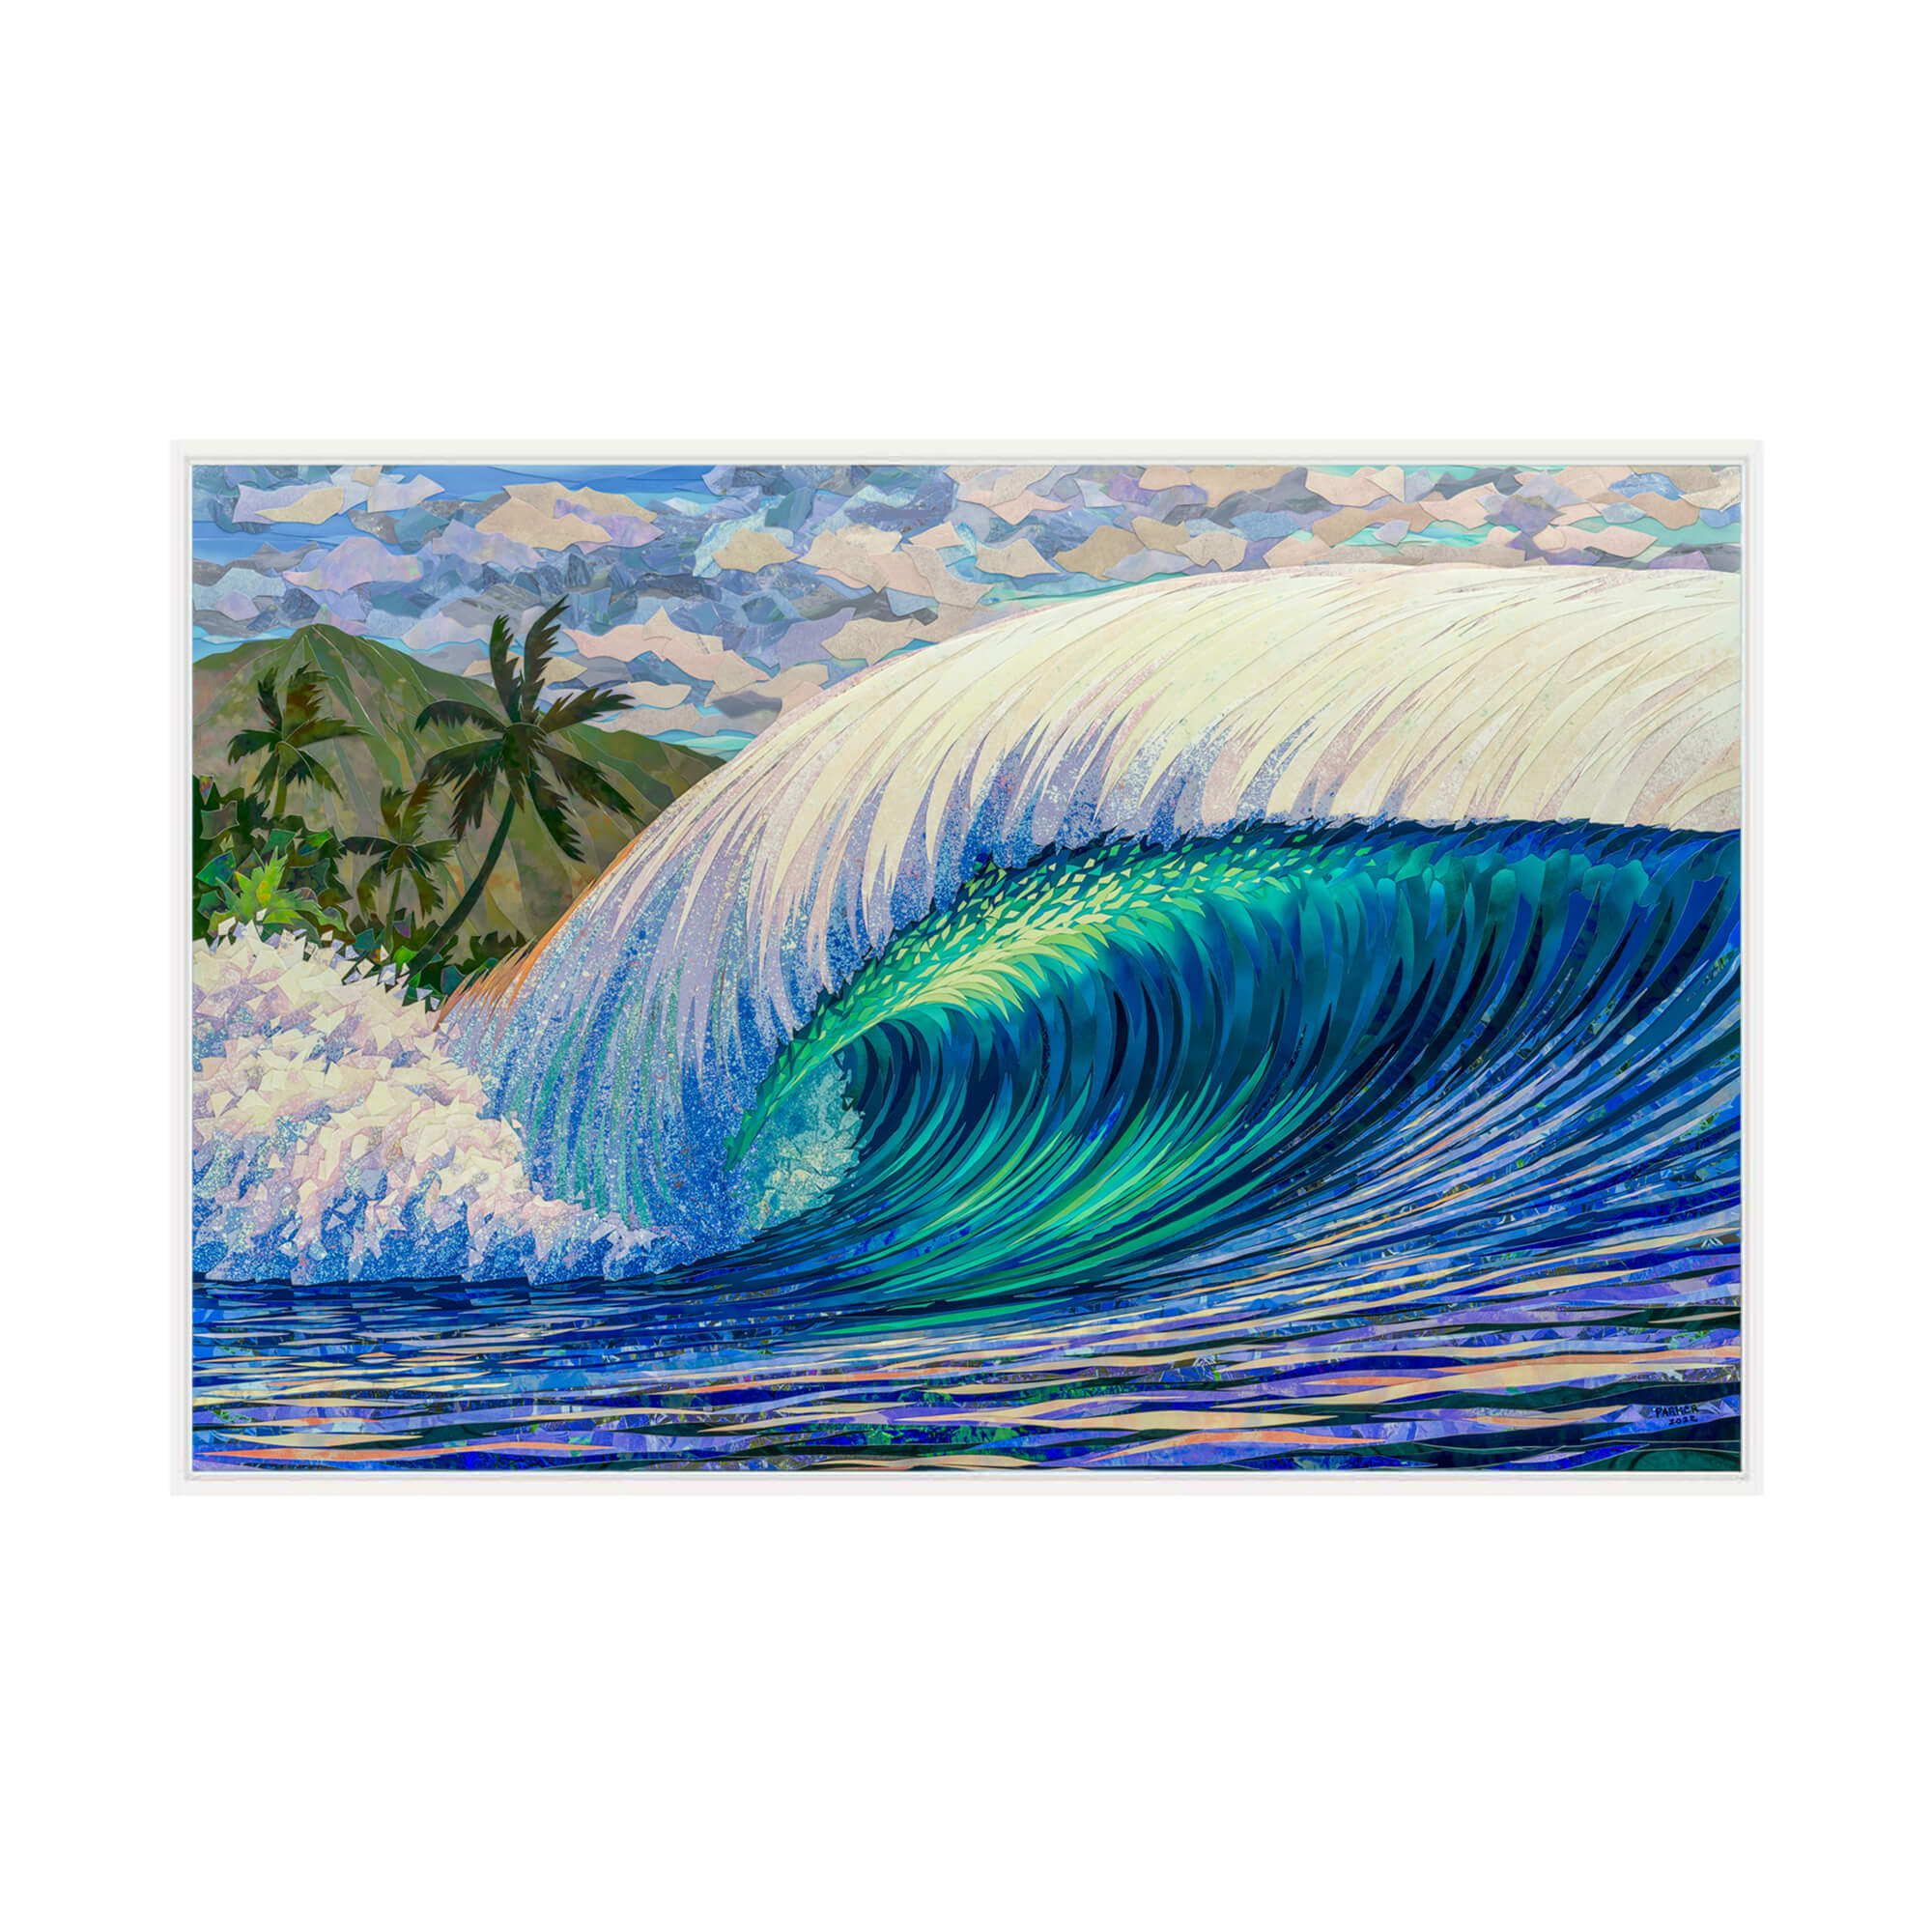 A framed canvas giclée art print featuring a collage of a large colorful rolling wave and a beautiful mountain background by Hawaii artist Patrick Parker